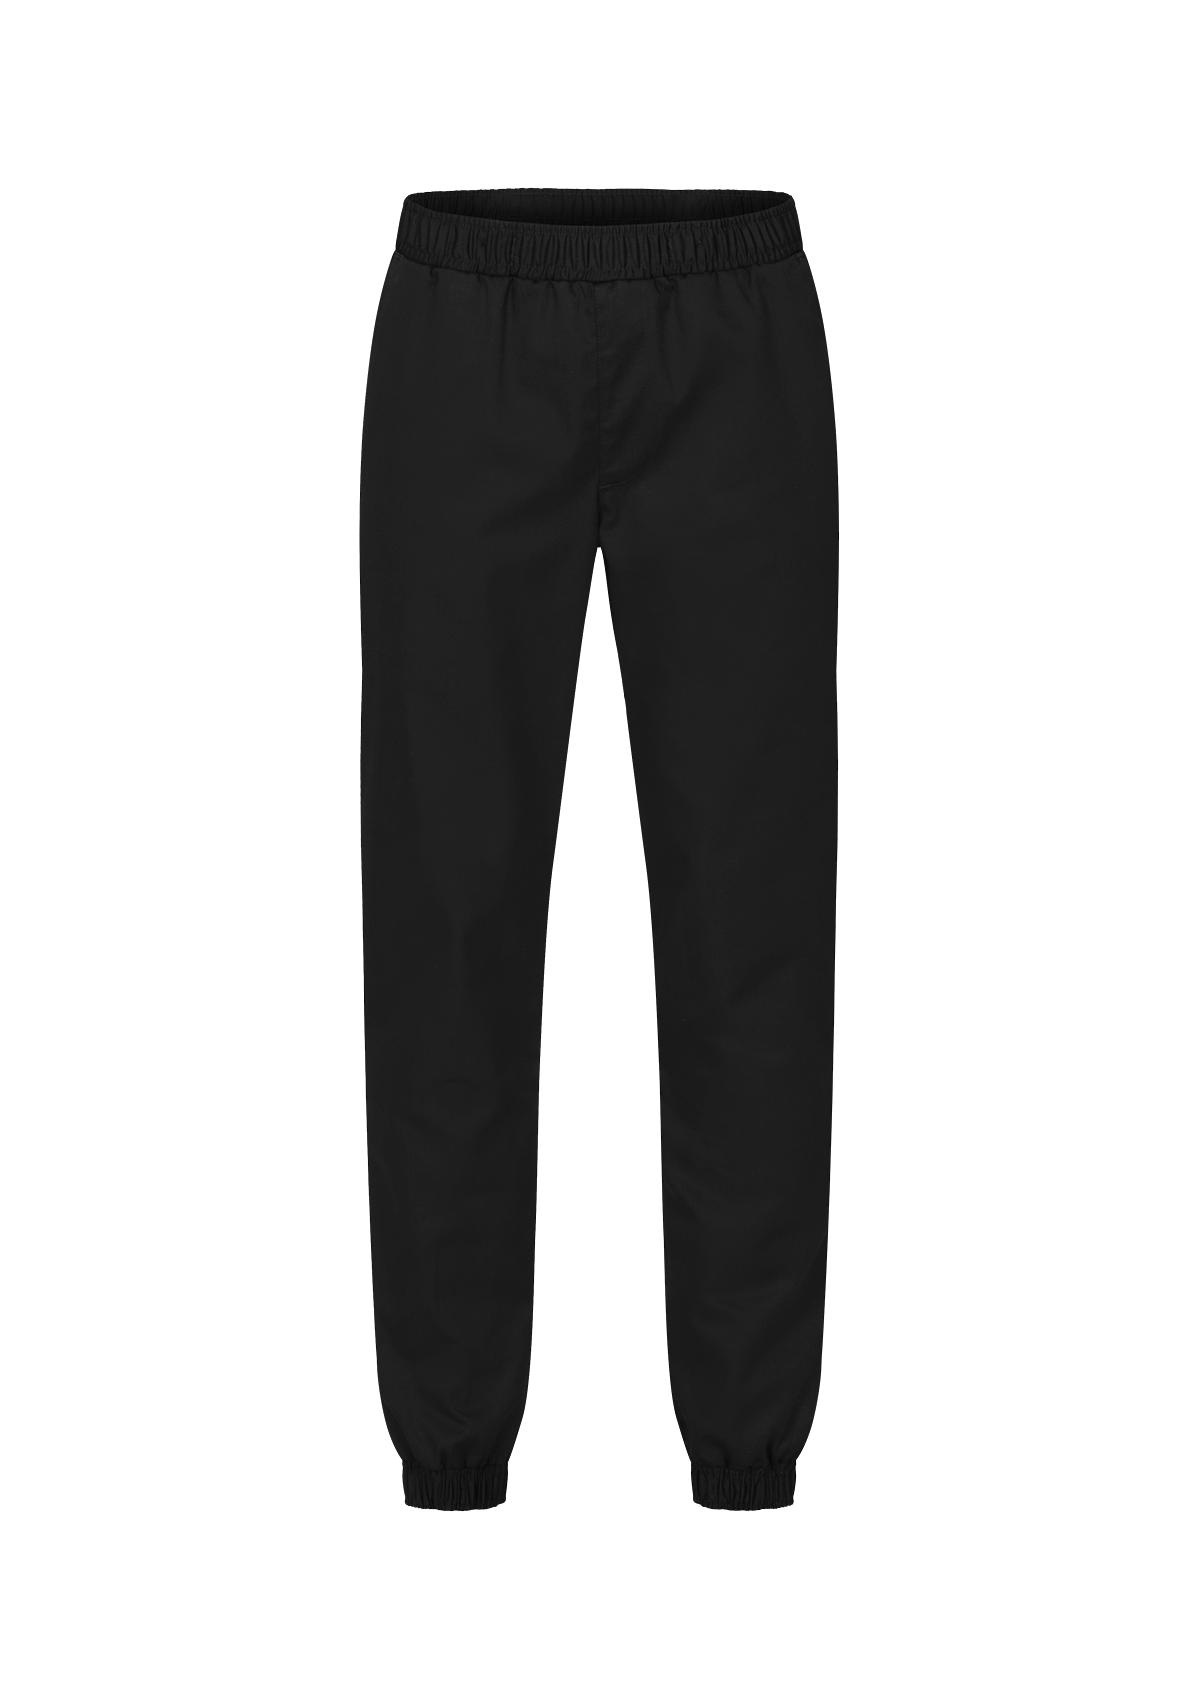 Pants in a Unisex Relaxed Fit